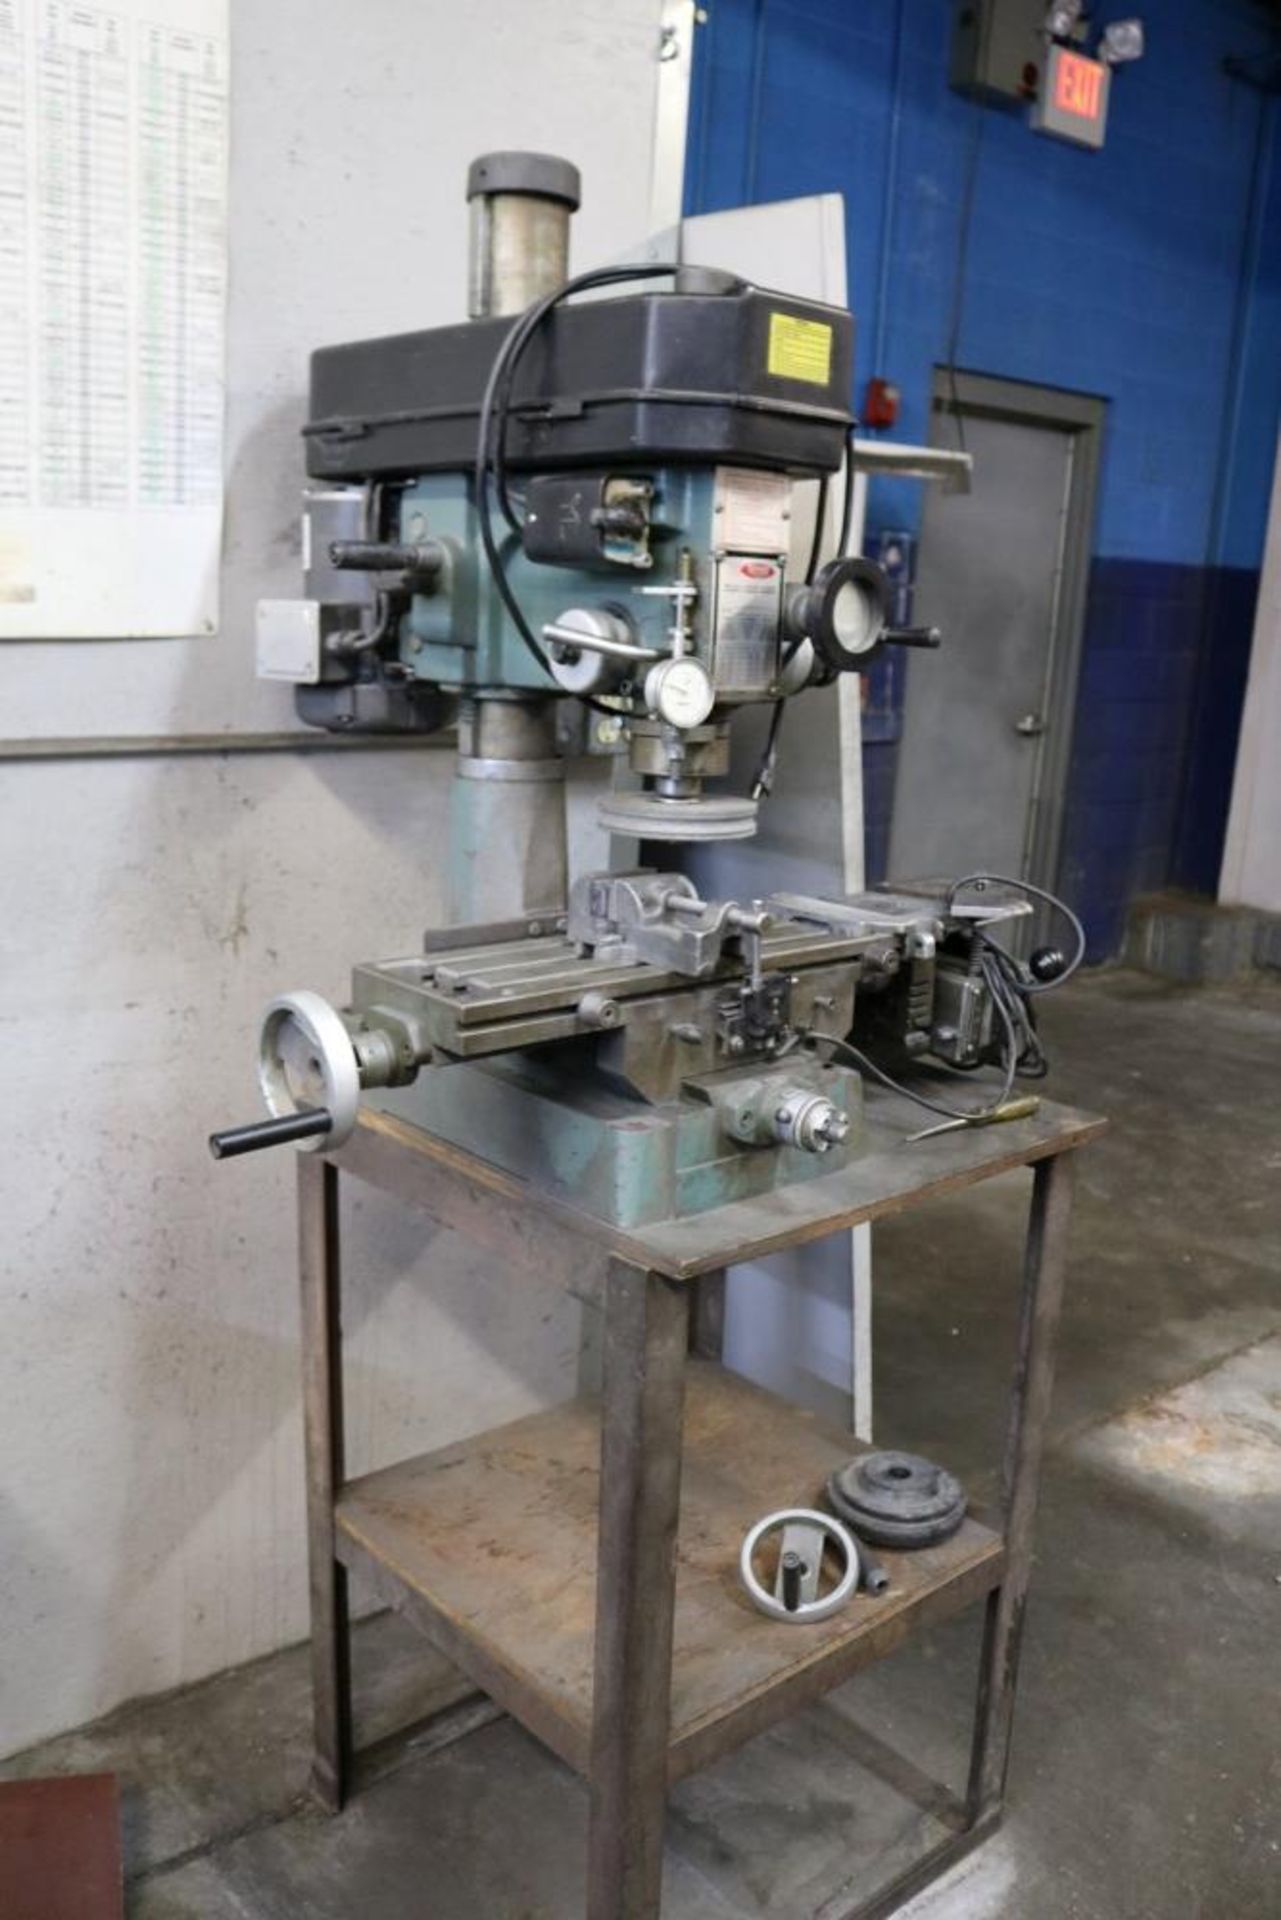 Rutland Bench Top Knee Mill with 3" Vise, Y axis Servo on Stand, Max RPM 2580, 21" x 7" Grinding